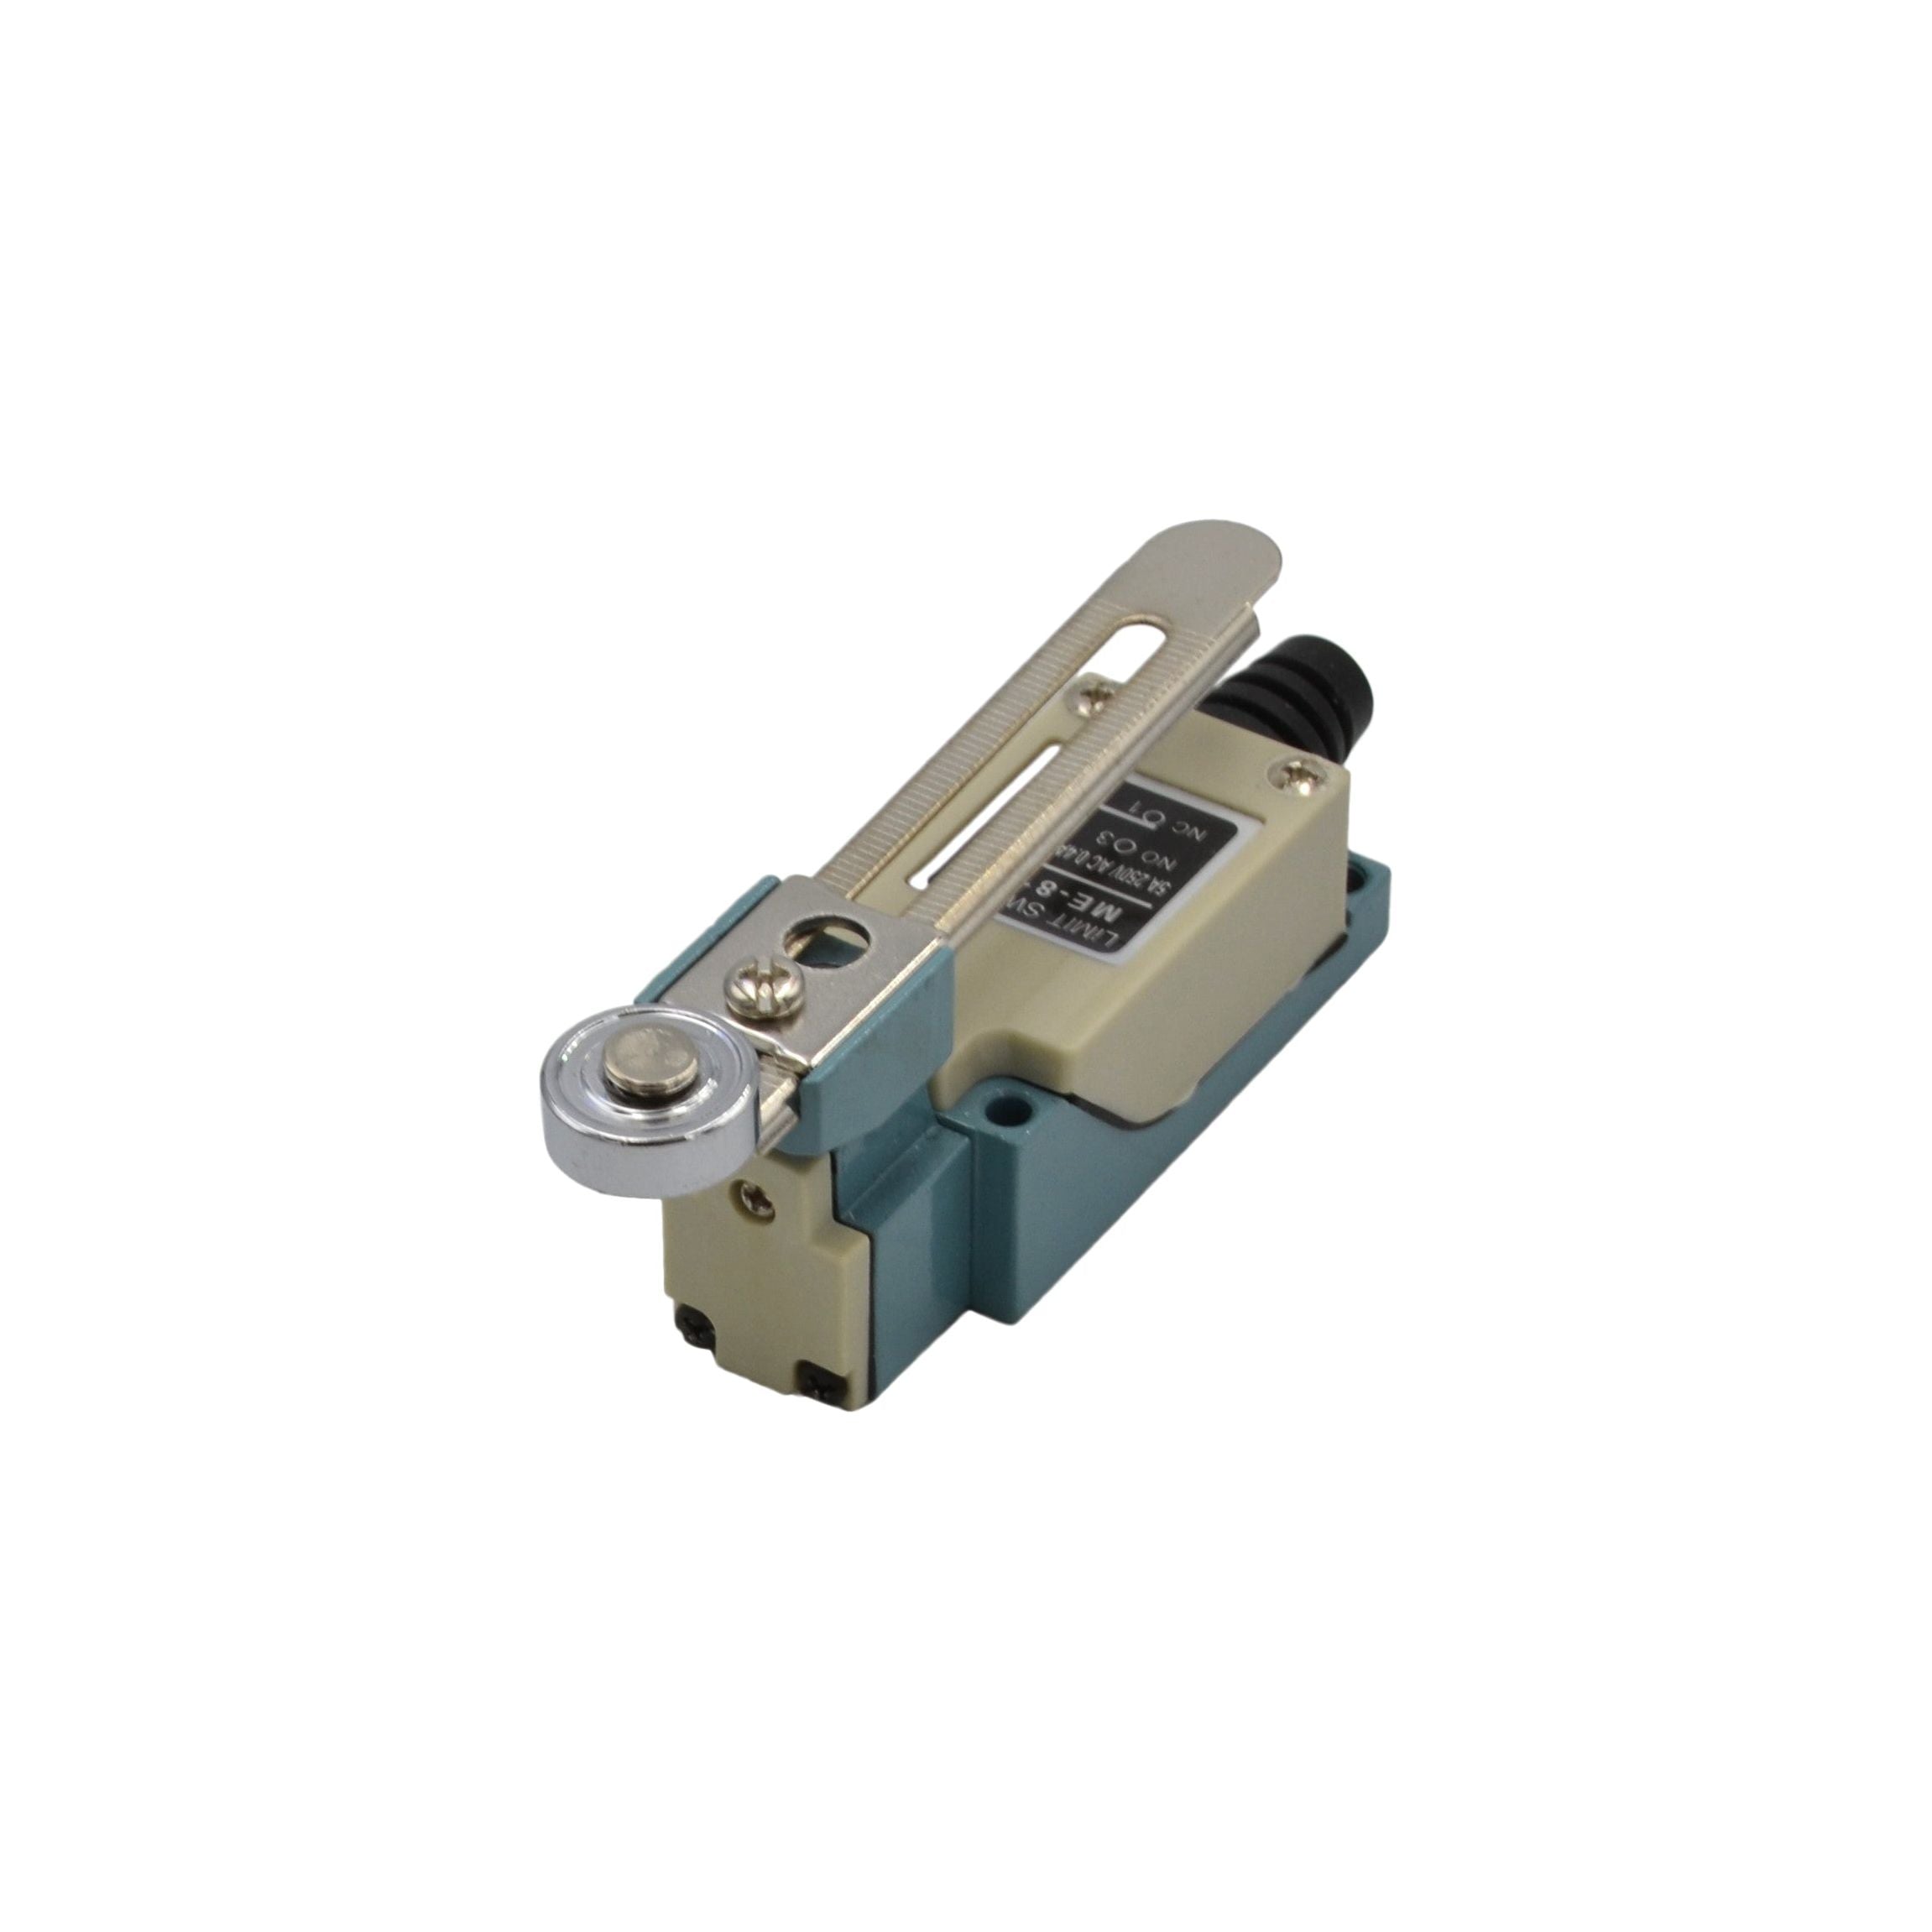 ME-8108 Rotary Adjustable Roller Lever Arm Limit Switch